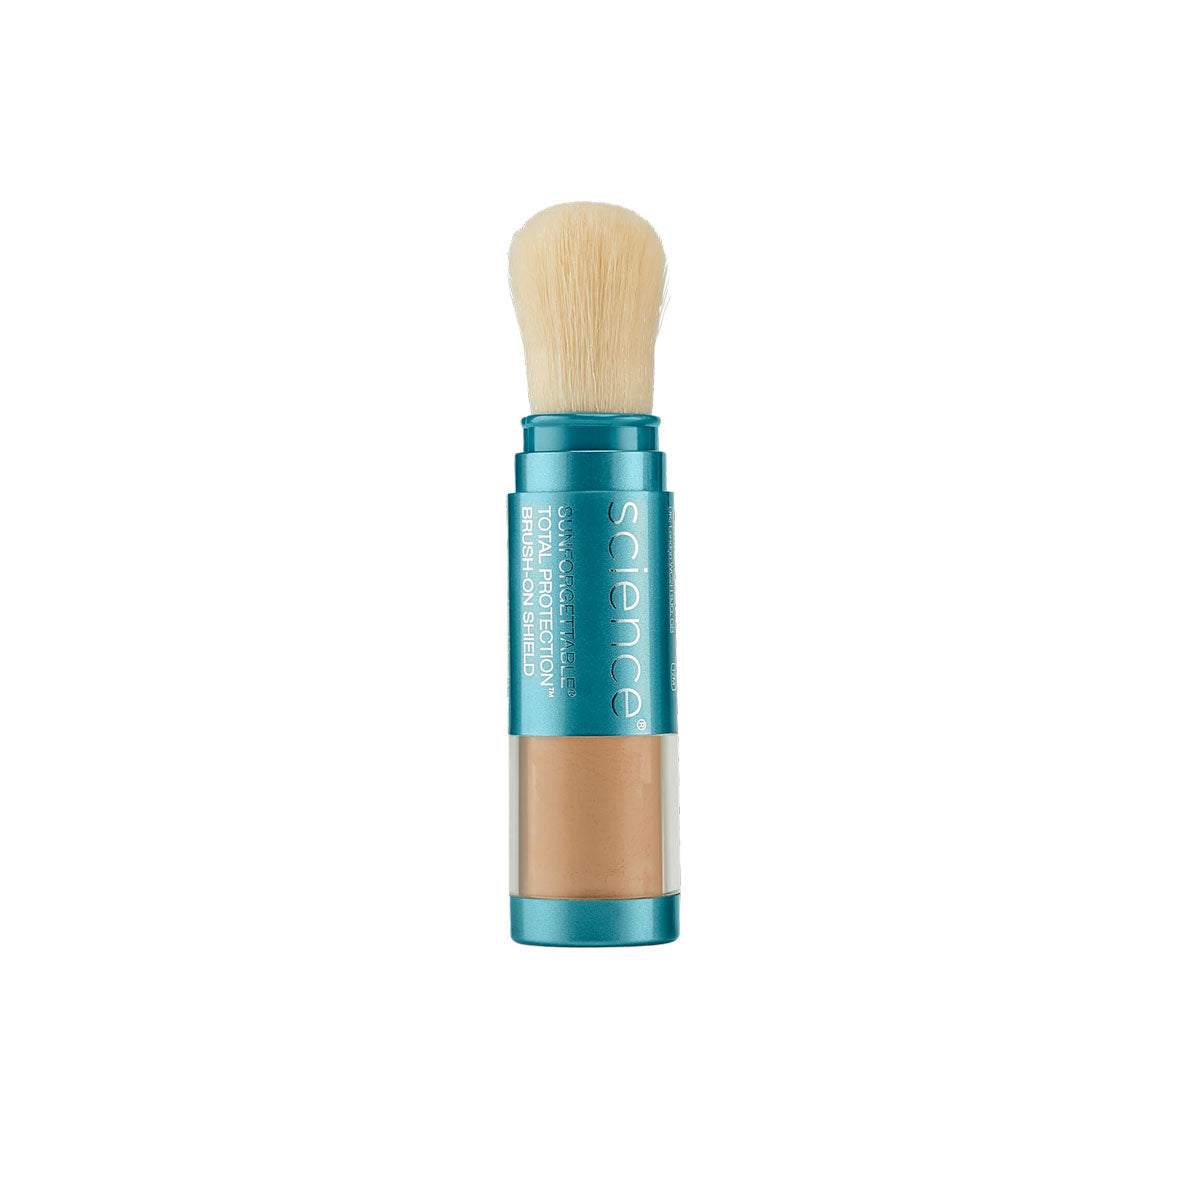 colorescience Products Sunforgettable Total Protection Brush-on Shield SPF 50 tan